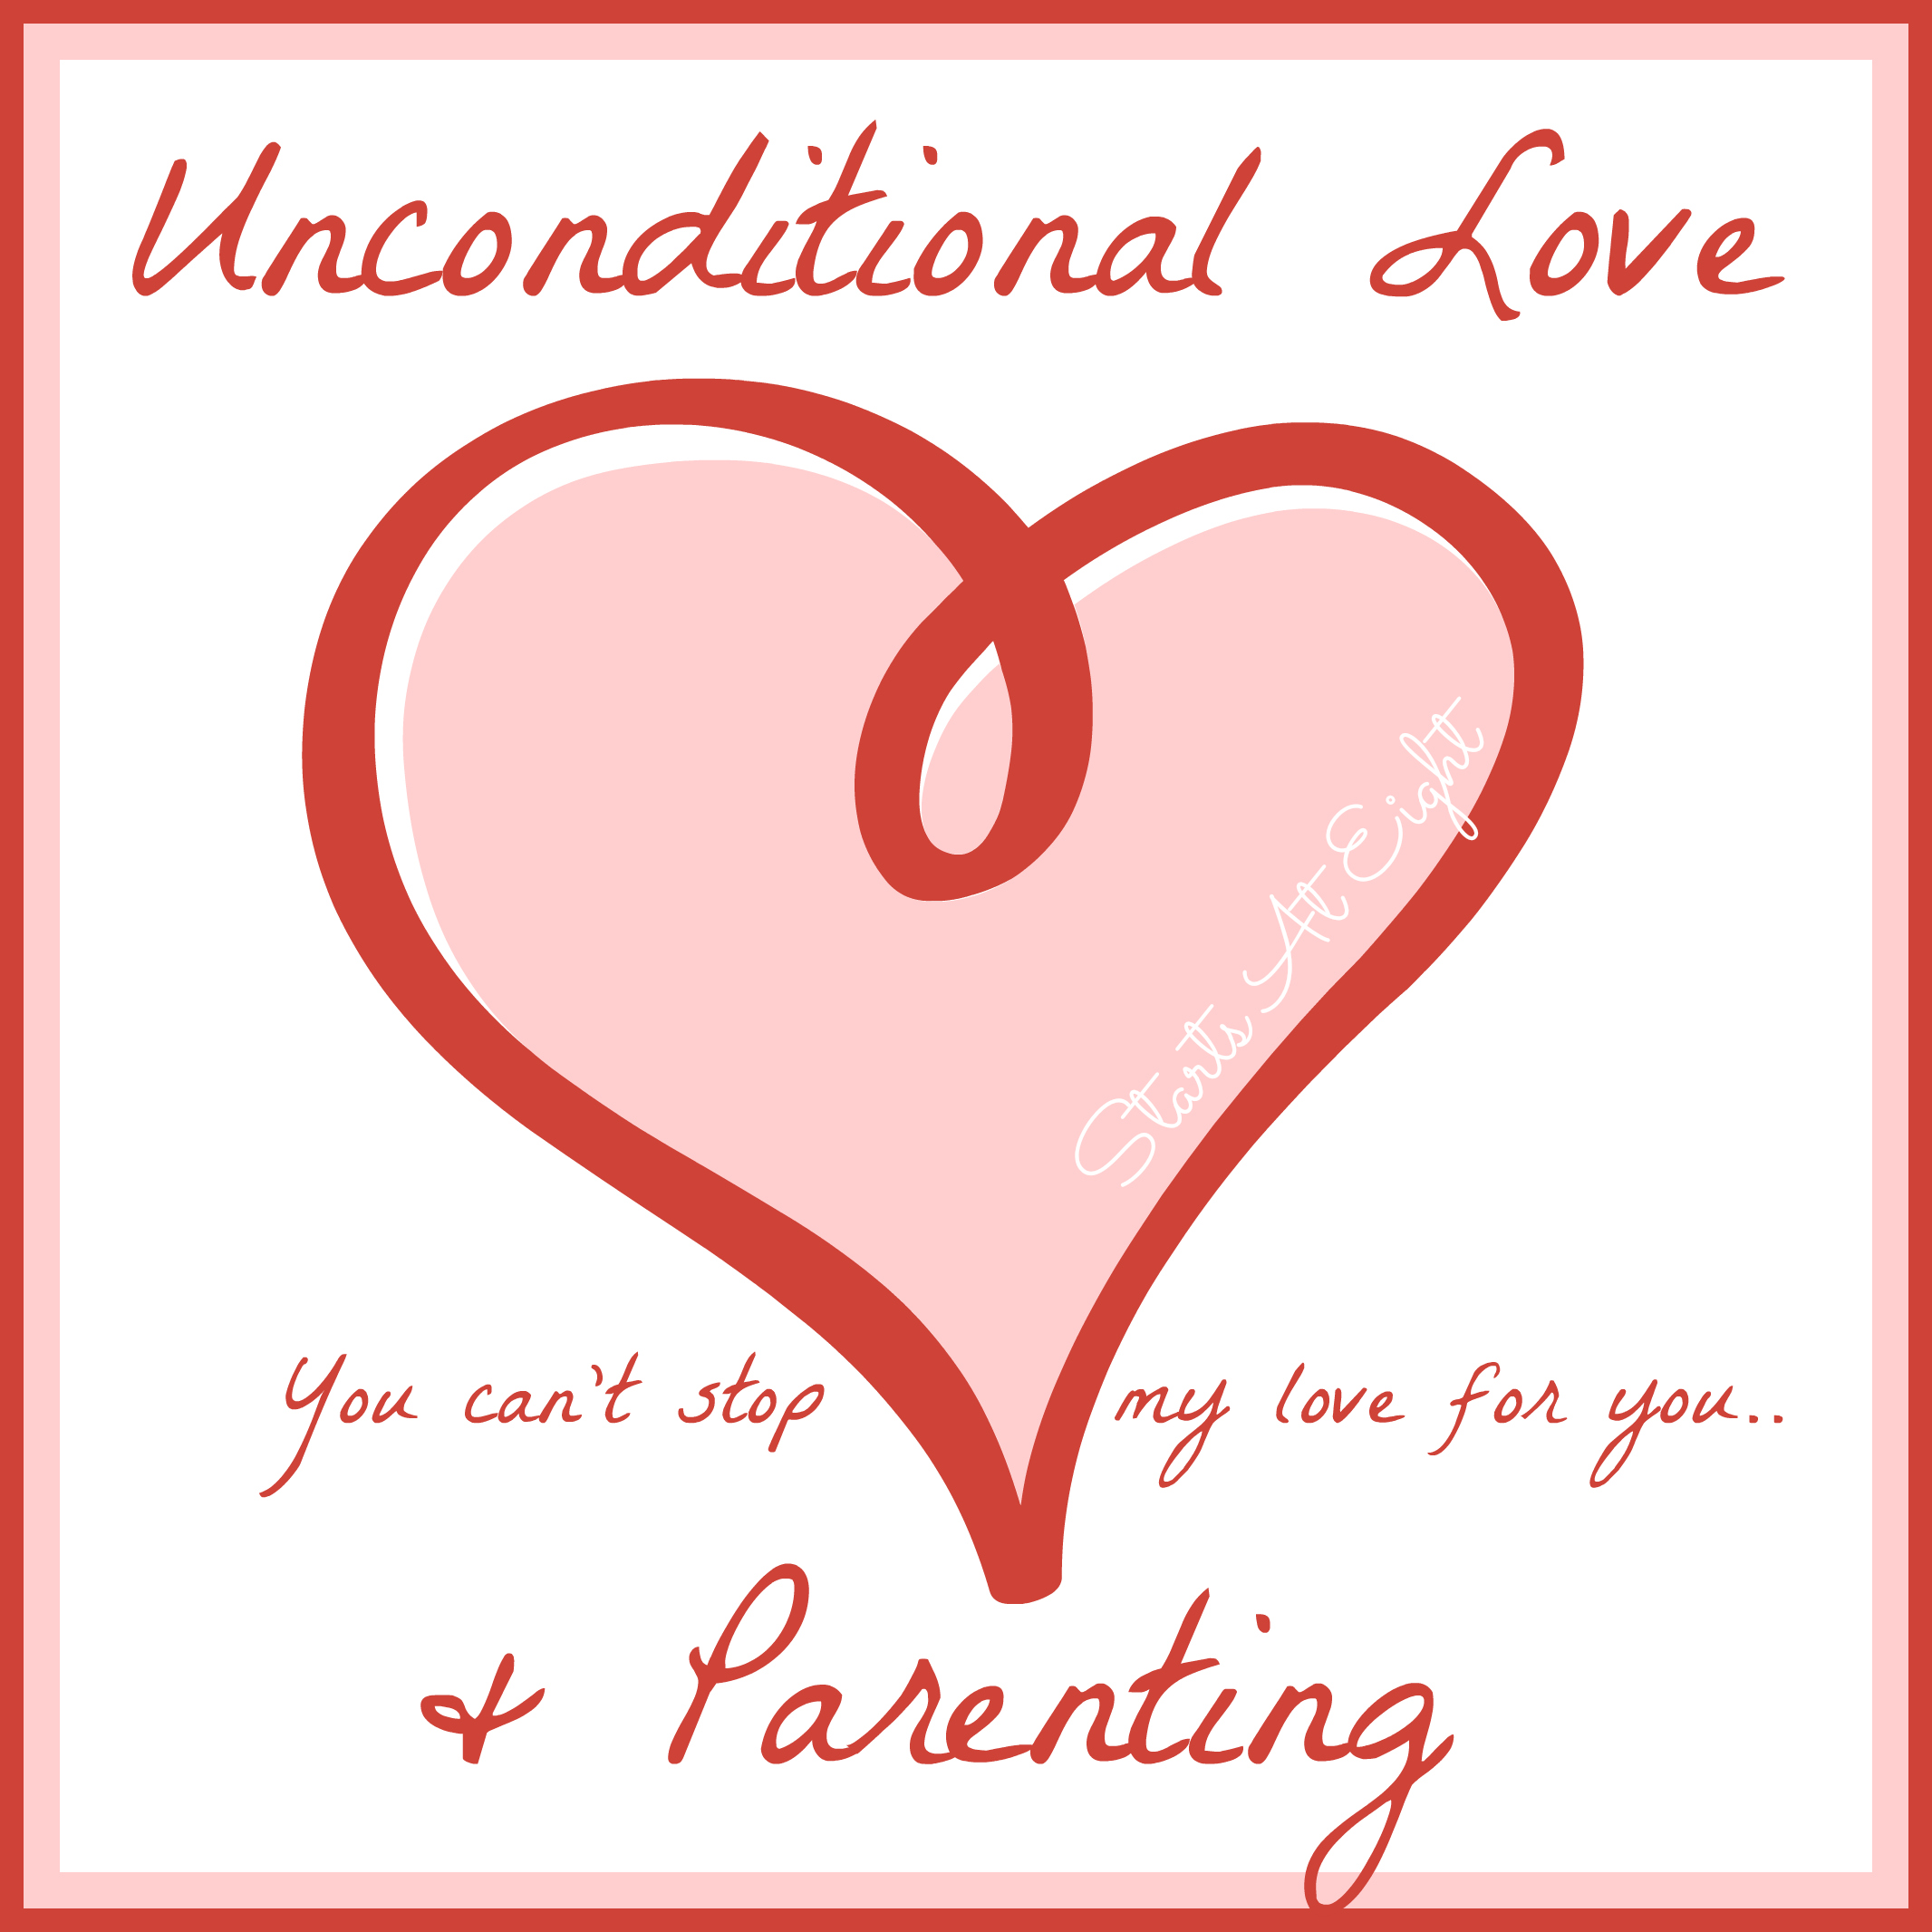 Unconditional Love & Parenting from Starts At Eight